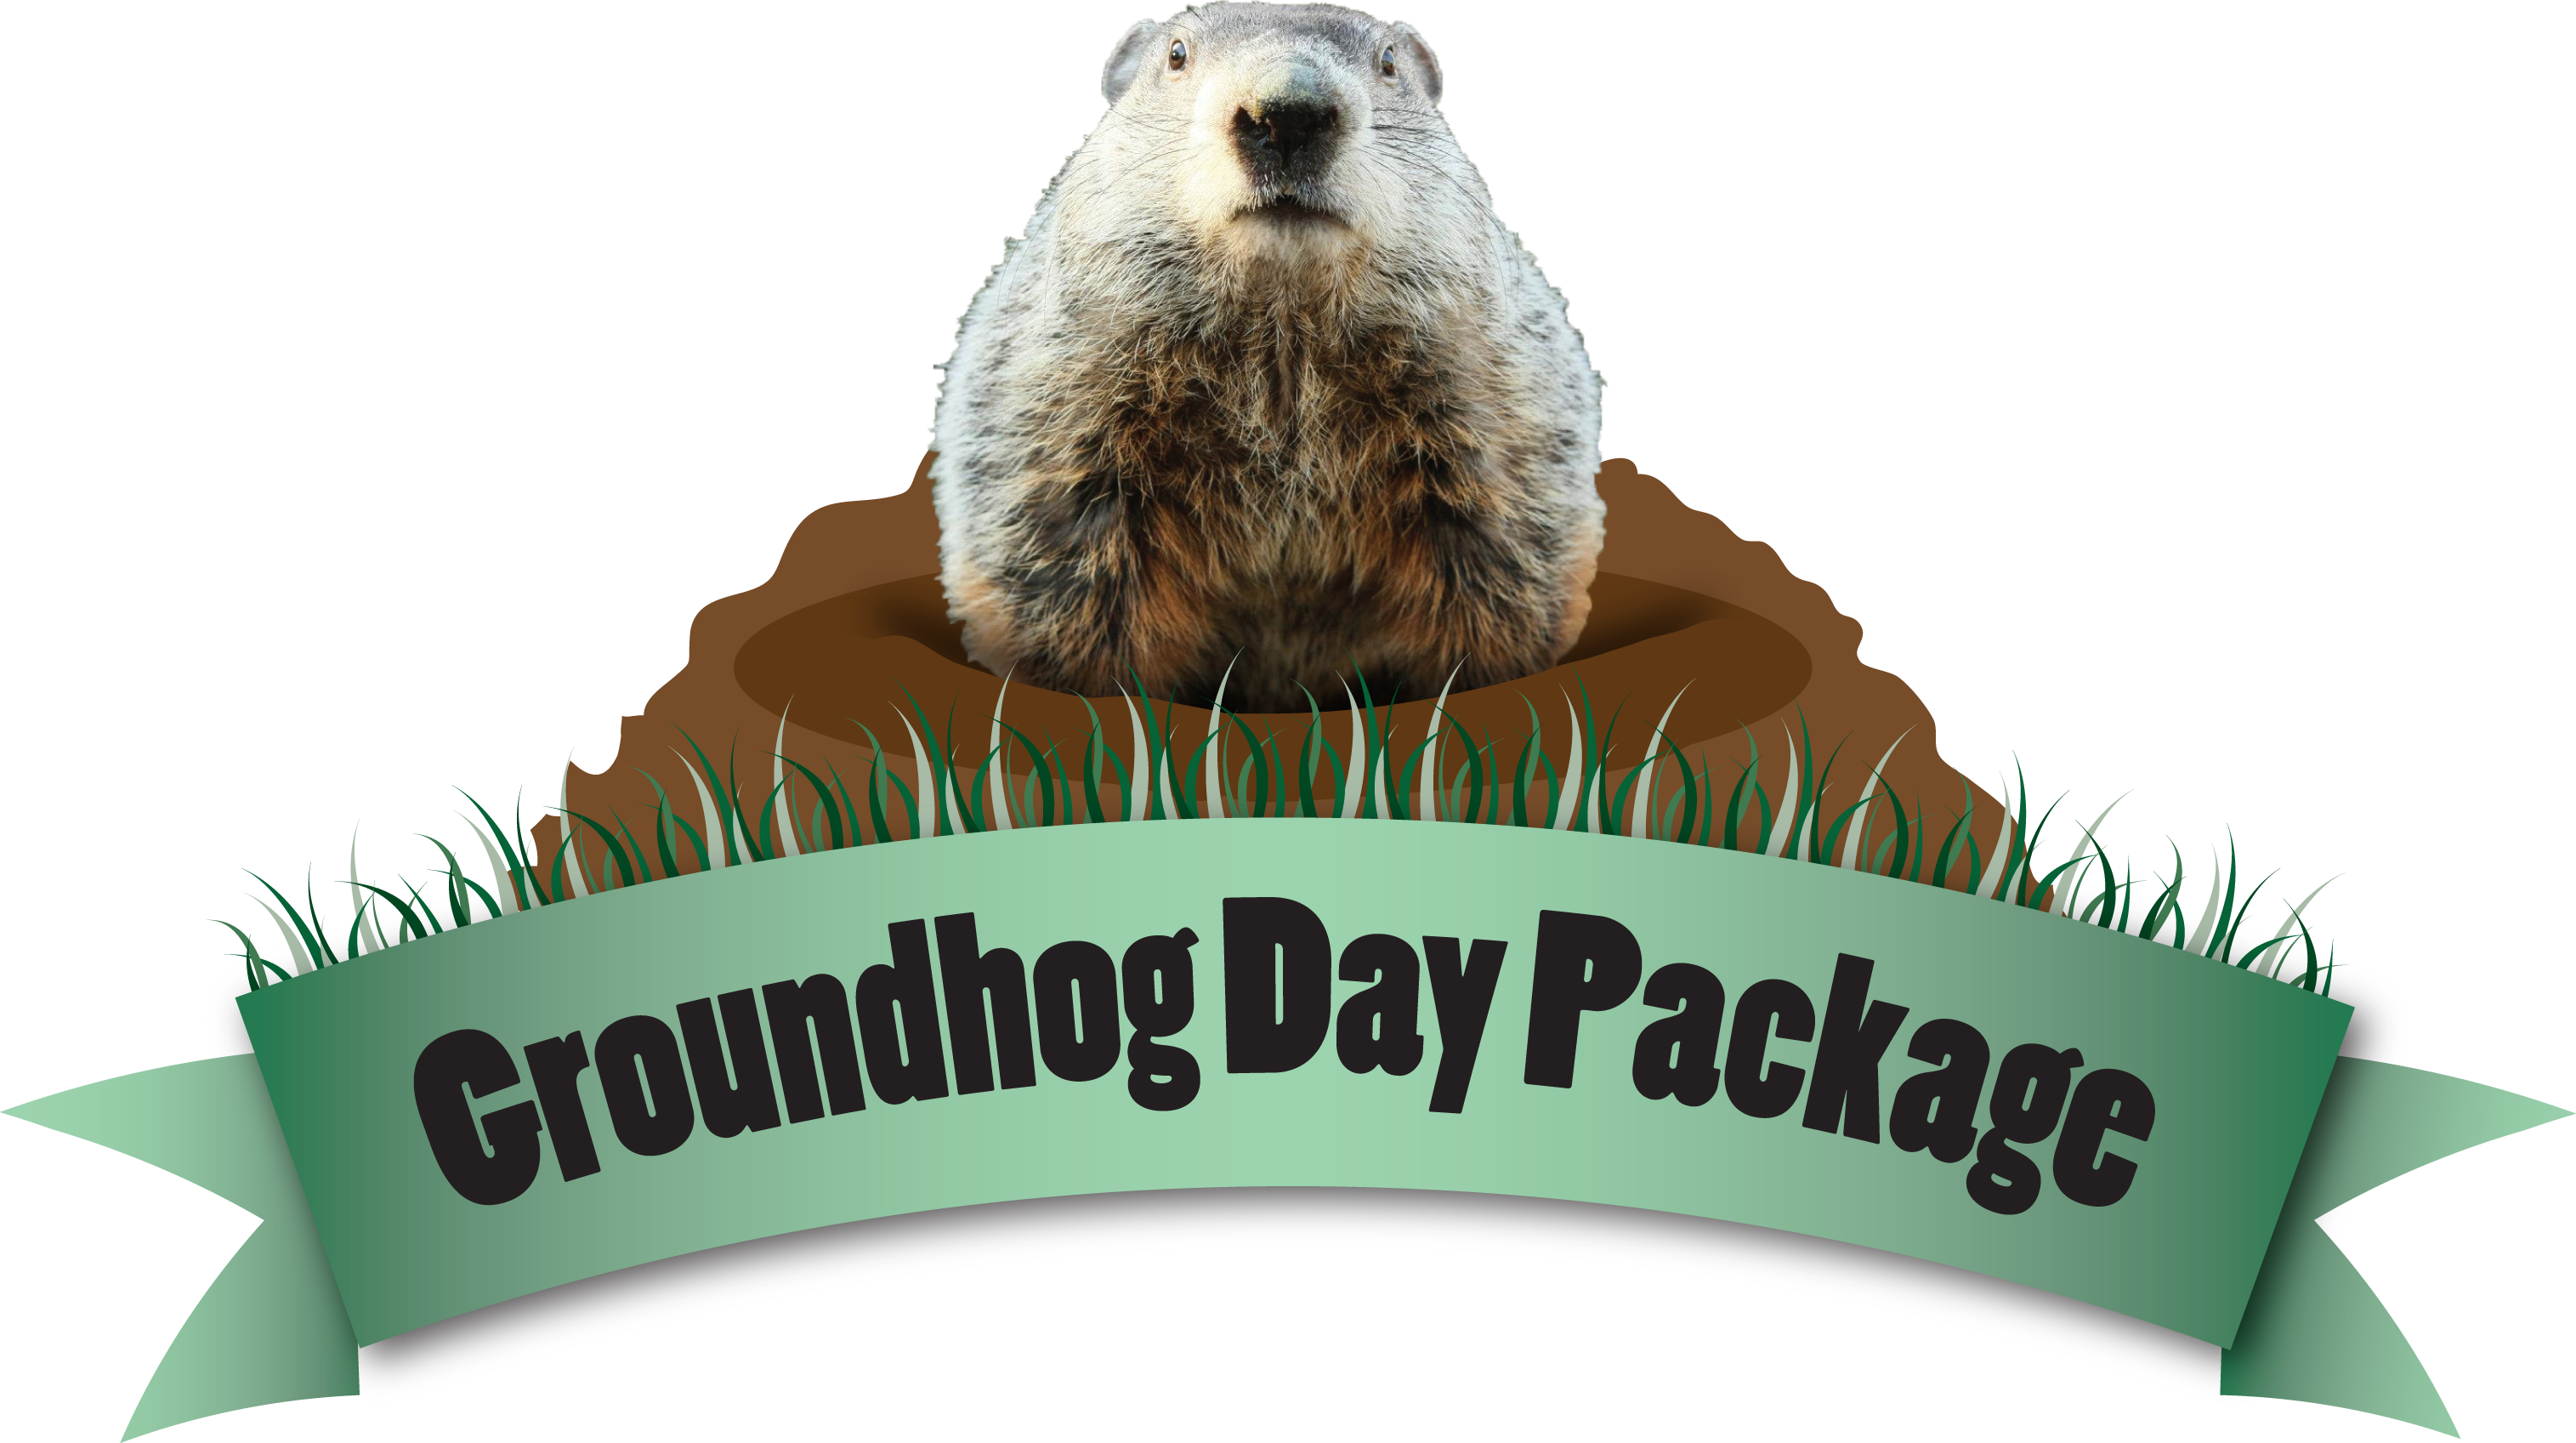 Groundhog Day Package Promo